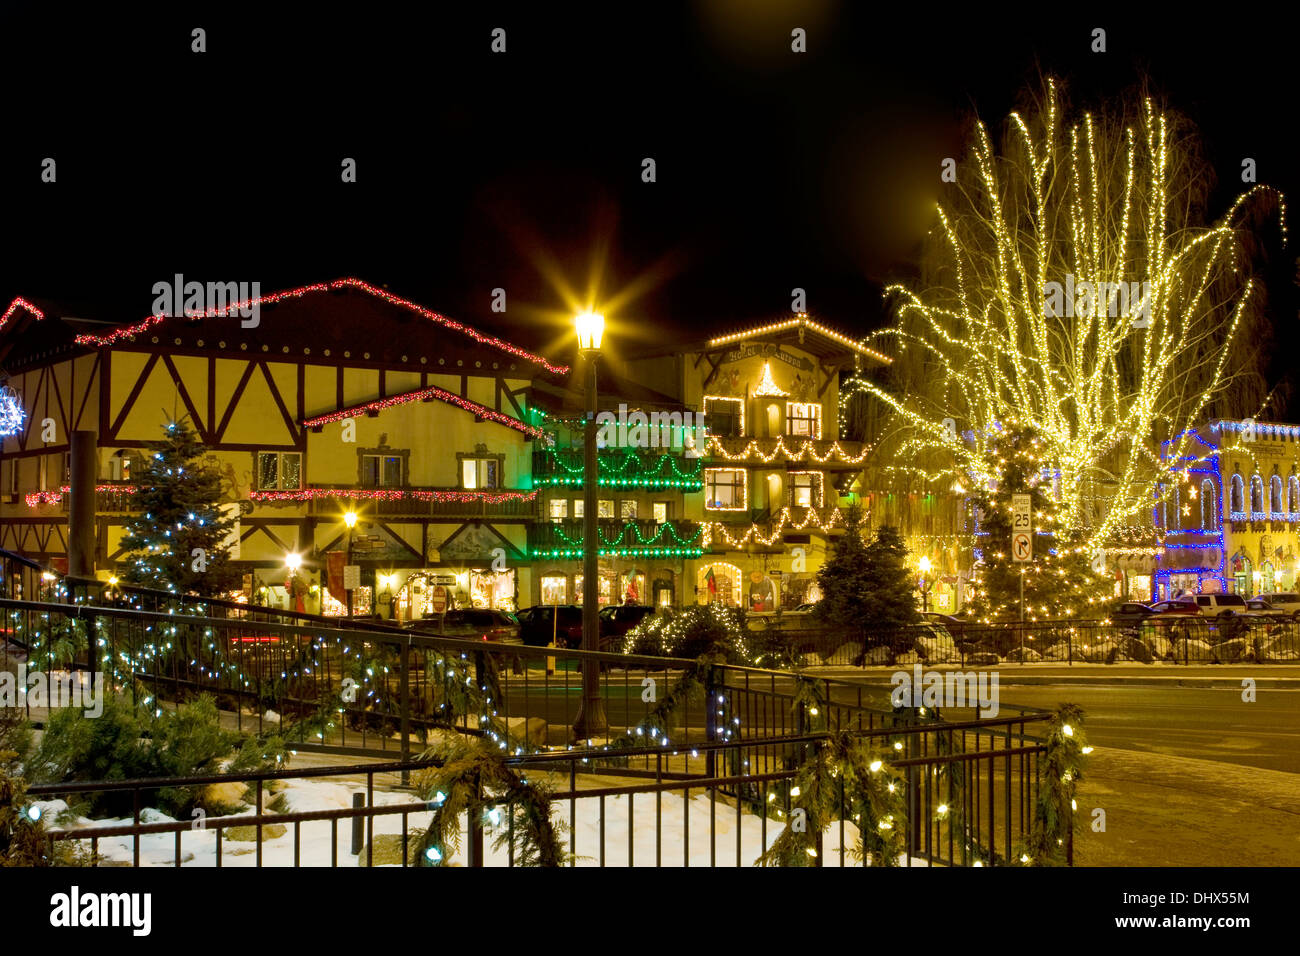 The town of Leavenworth decorated with Christmas lights for the holiday season, Washington. Stock Photo